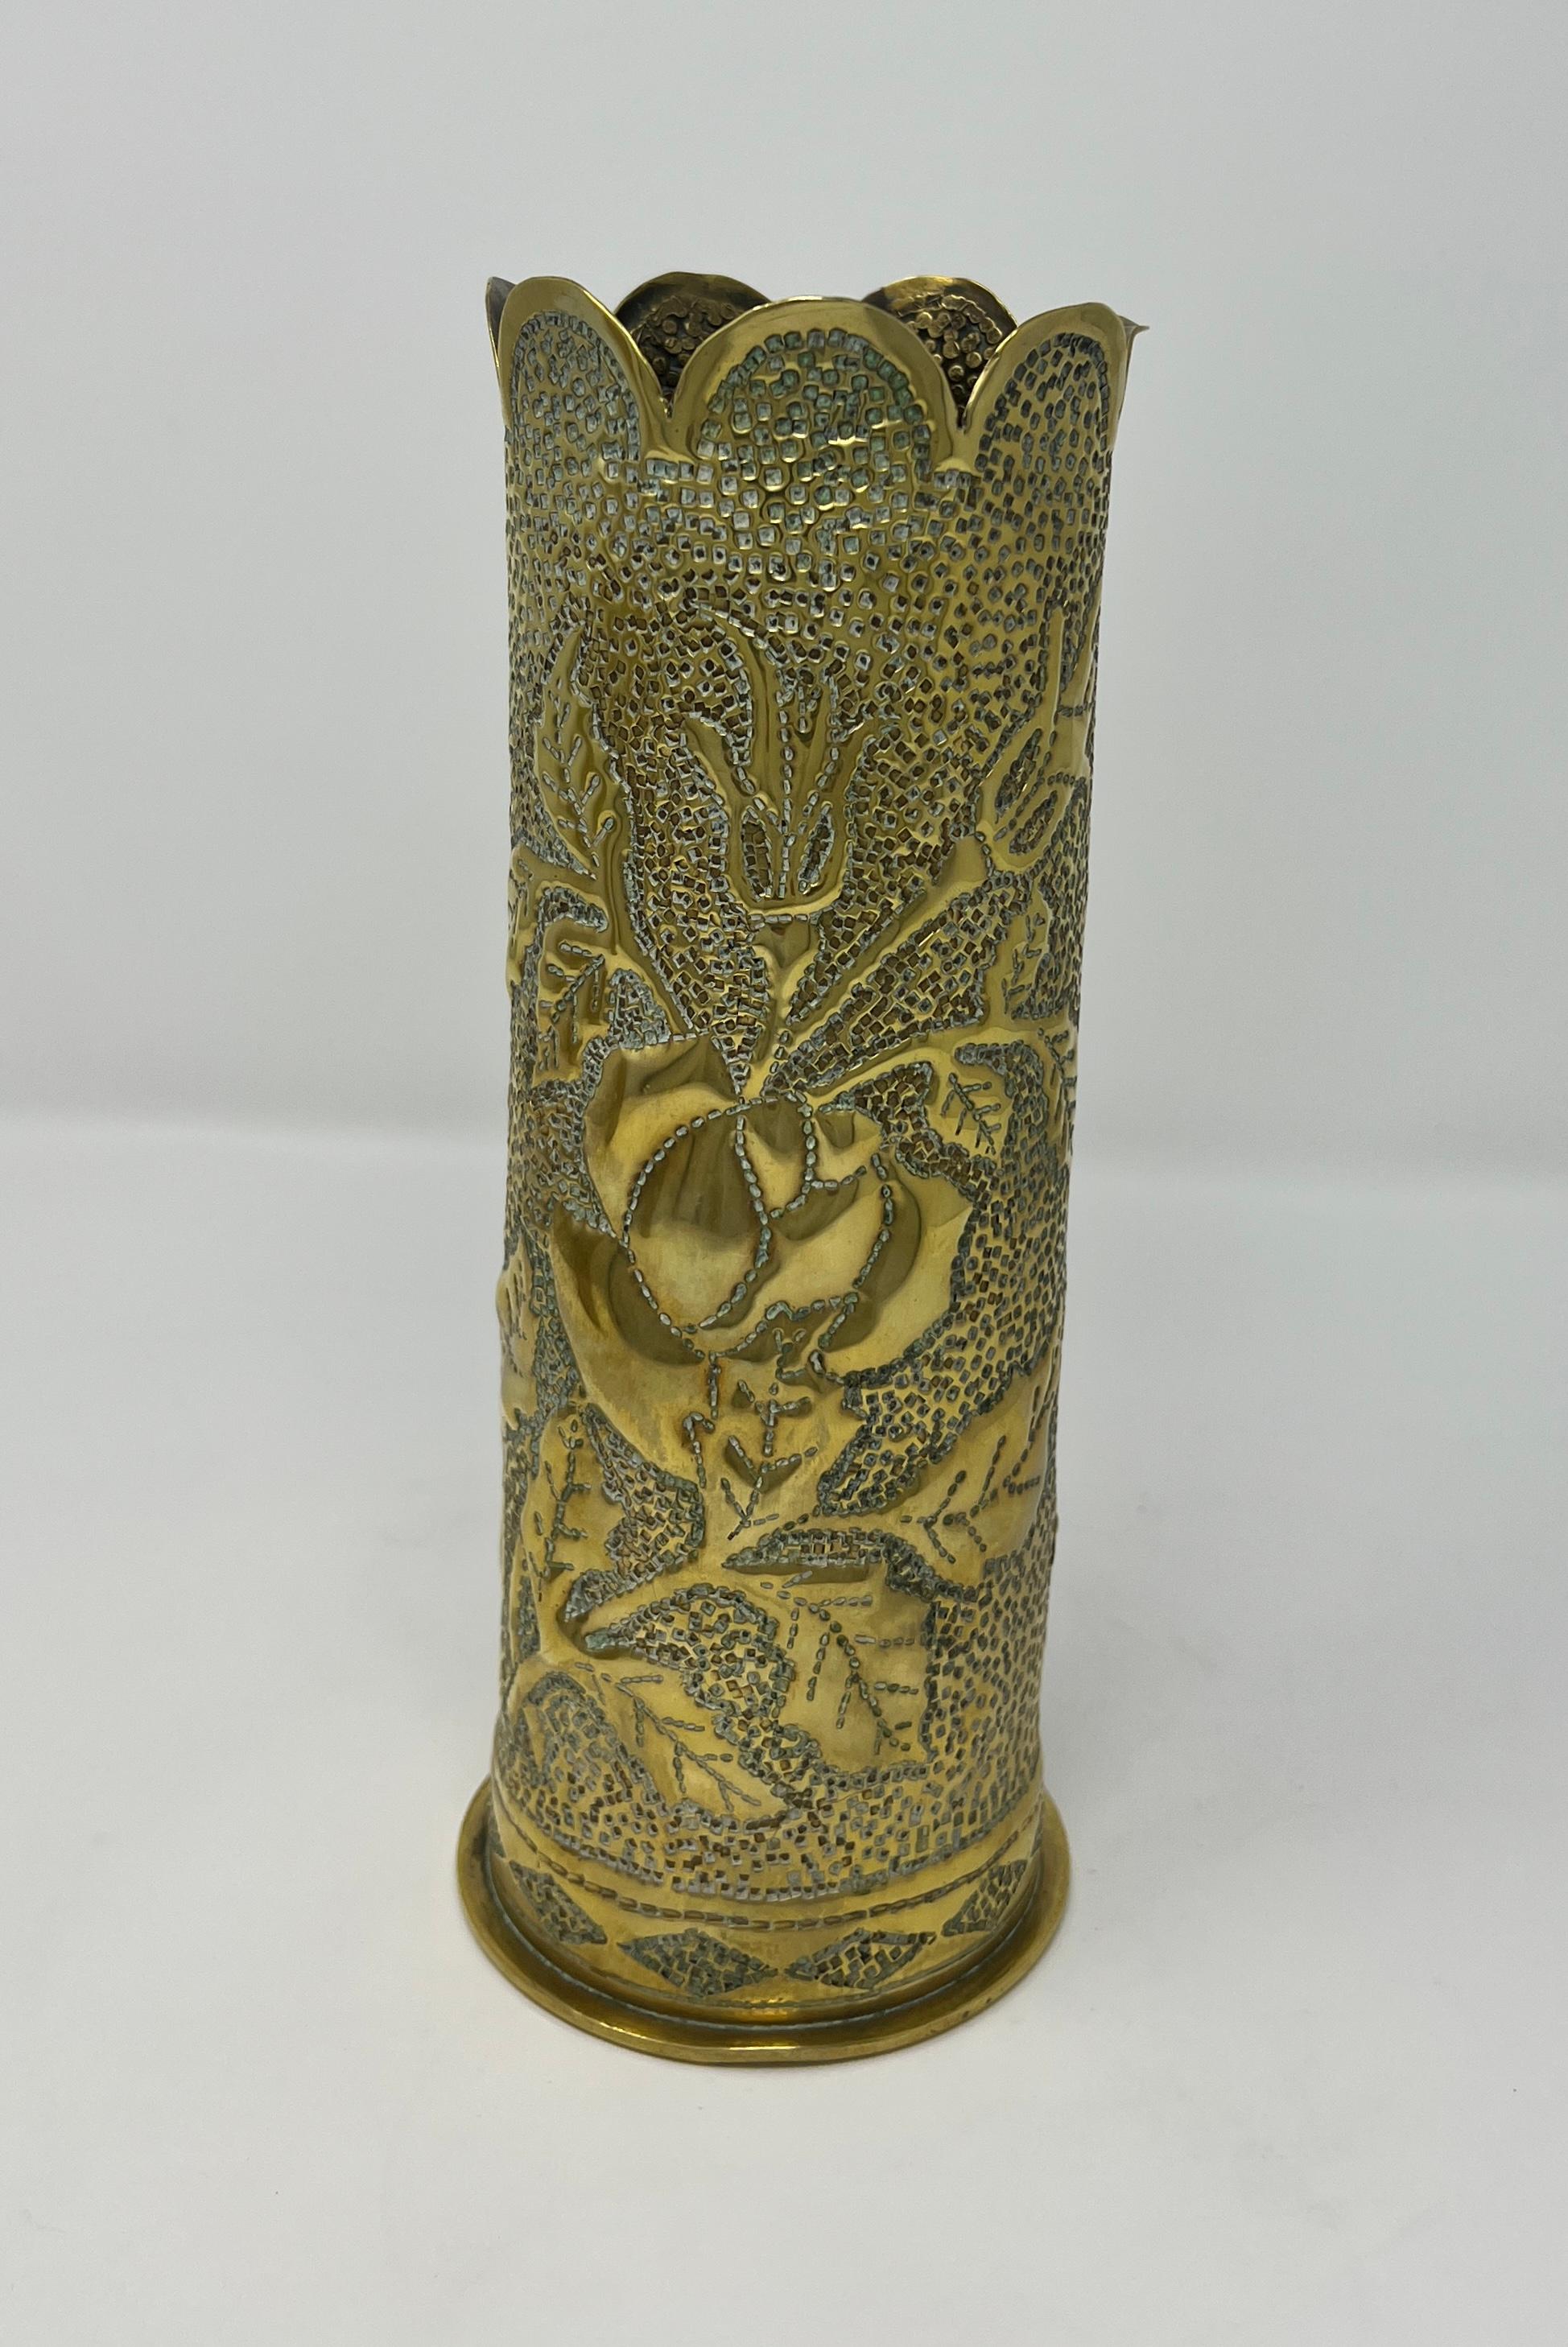 World War I Artillery Shell Vase made from German shell case base. Markings on bottom. Dixmude (Diksmuide, Belgium) was located in the part of Belgium called 